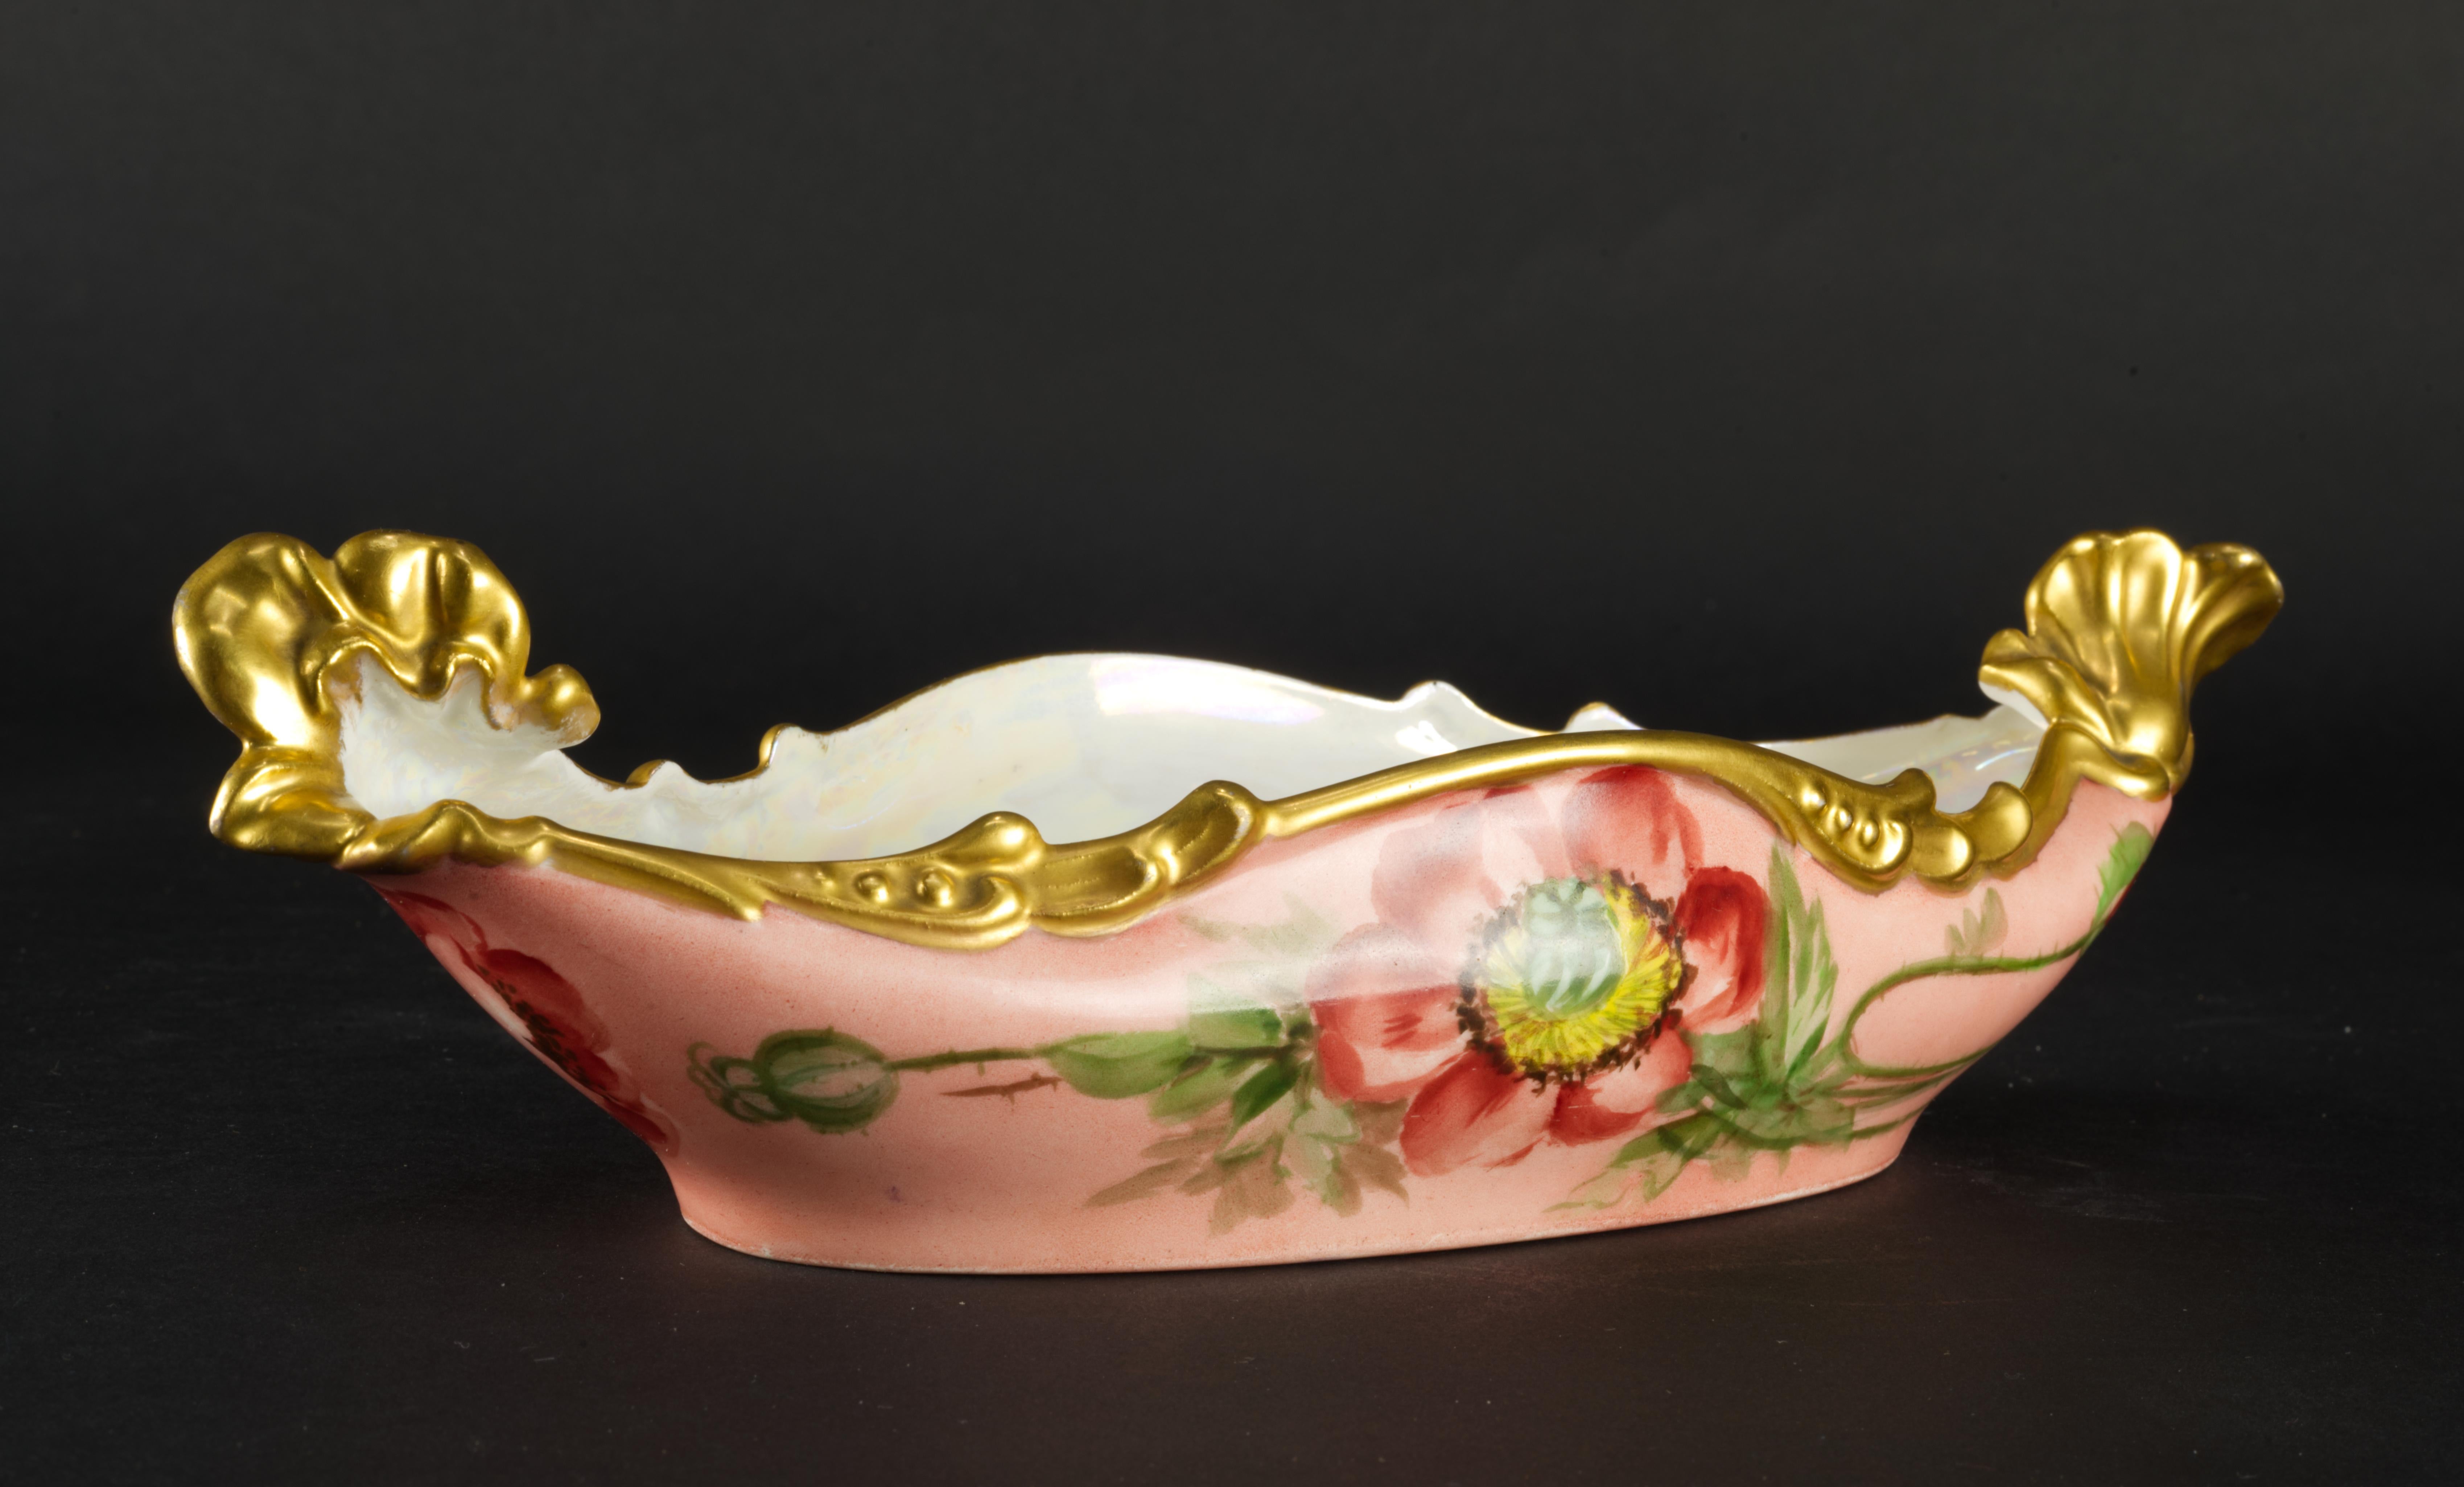 Rare Jean Pouyat Limoges France Oval Hand-painted Porcelain Ravier Bowl, 1926 For Sale 5